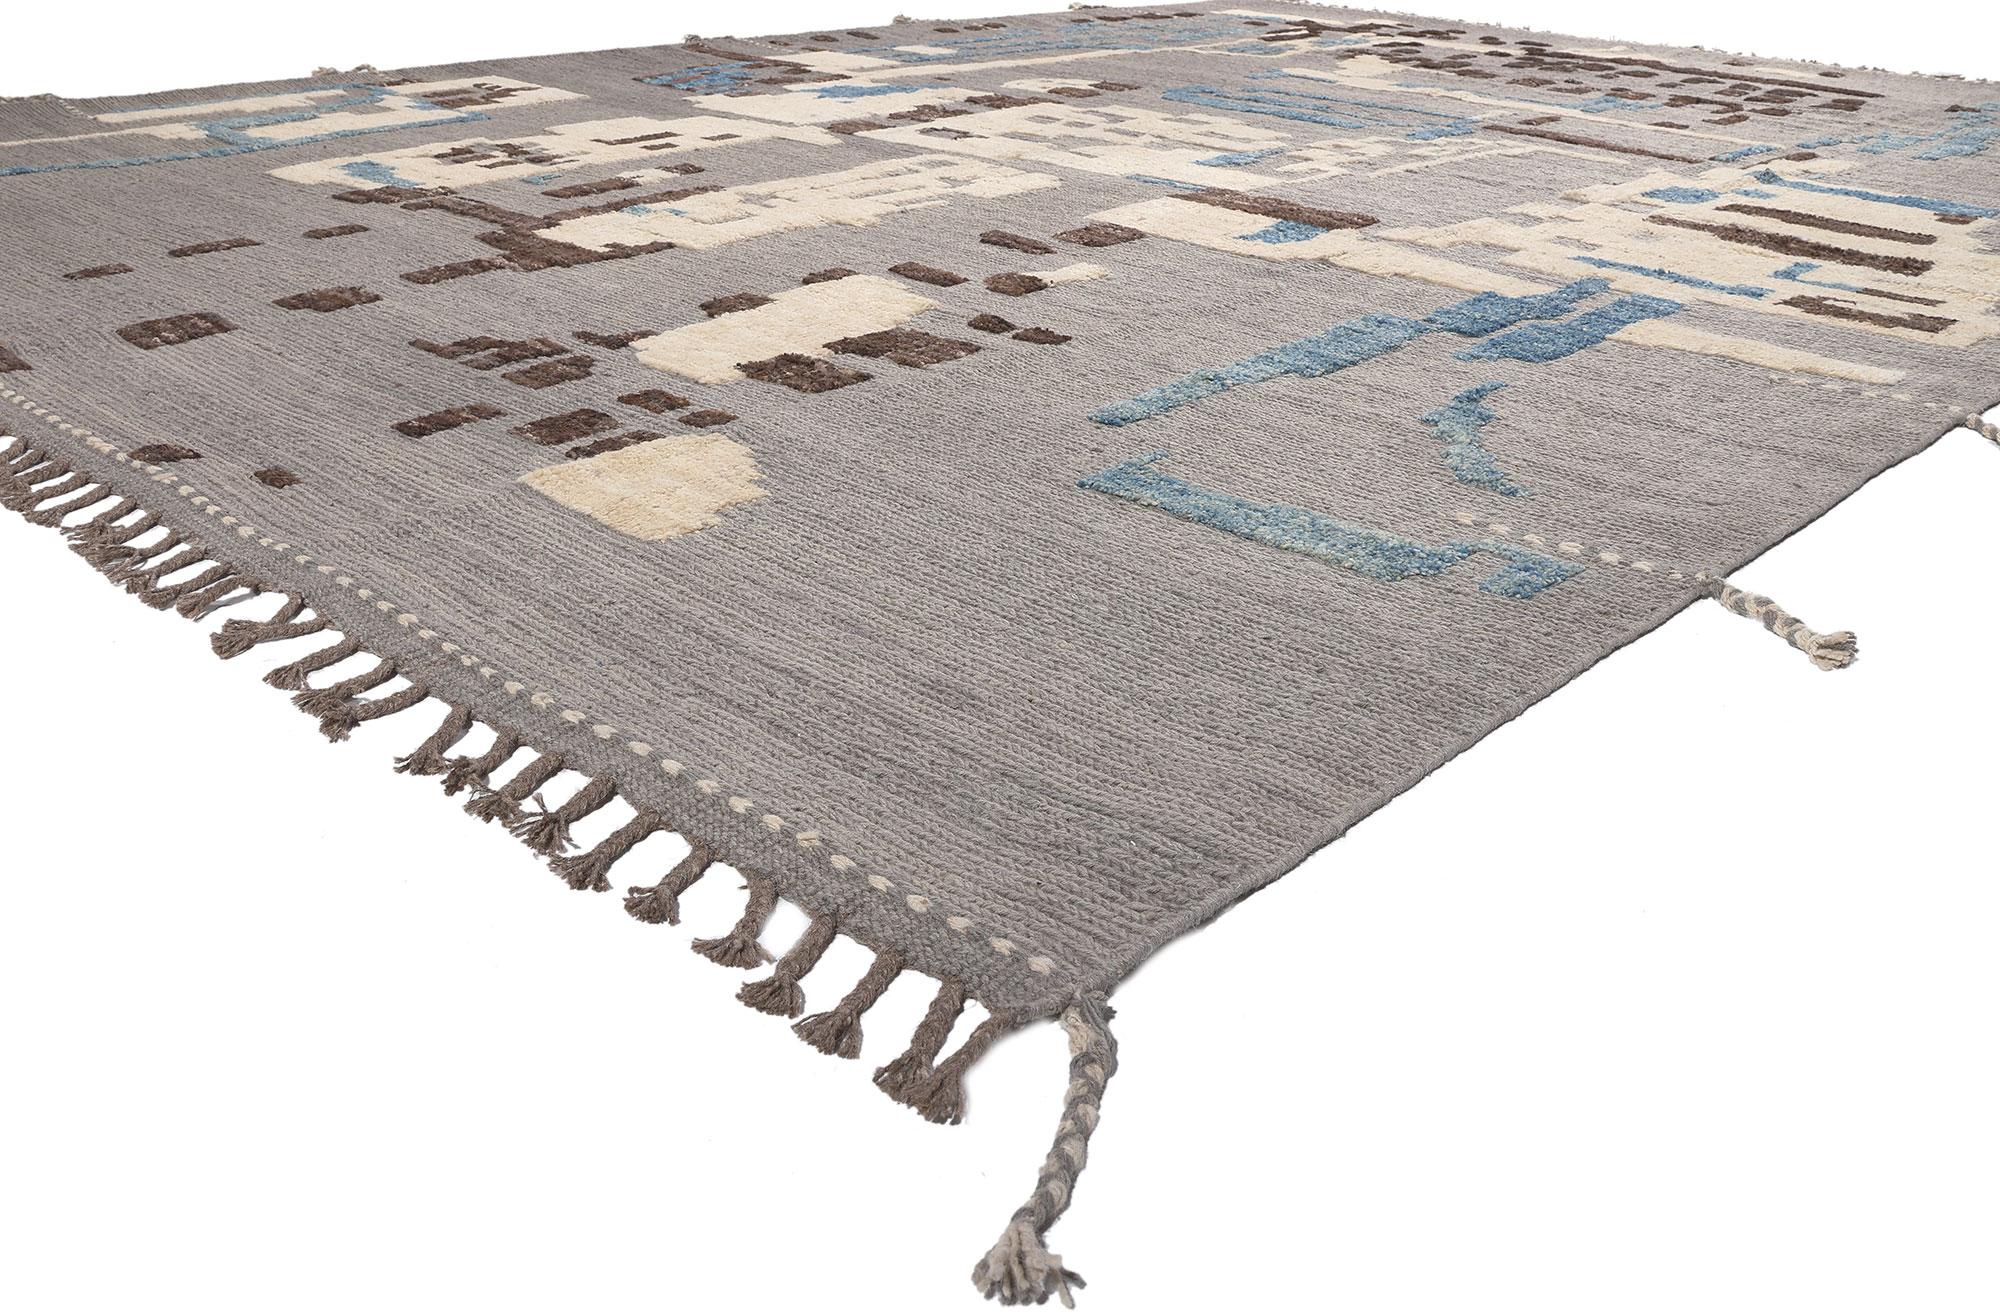 80984 Modern Moroccan Area Rug with Earth-Tone Colors, 11'08 x 16'01. Emanating Biophilic Design with incredible detail and texture, this large Moroccan high-low rug is a captivating vision of woven beauty. The raised design and earthy colorway